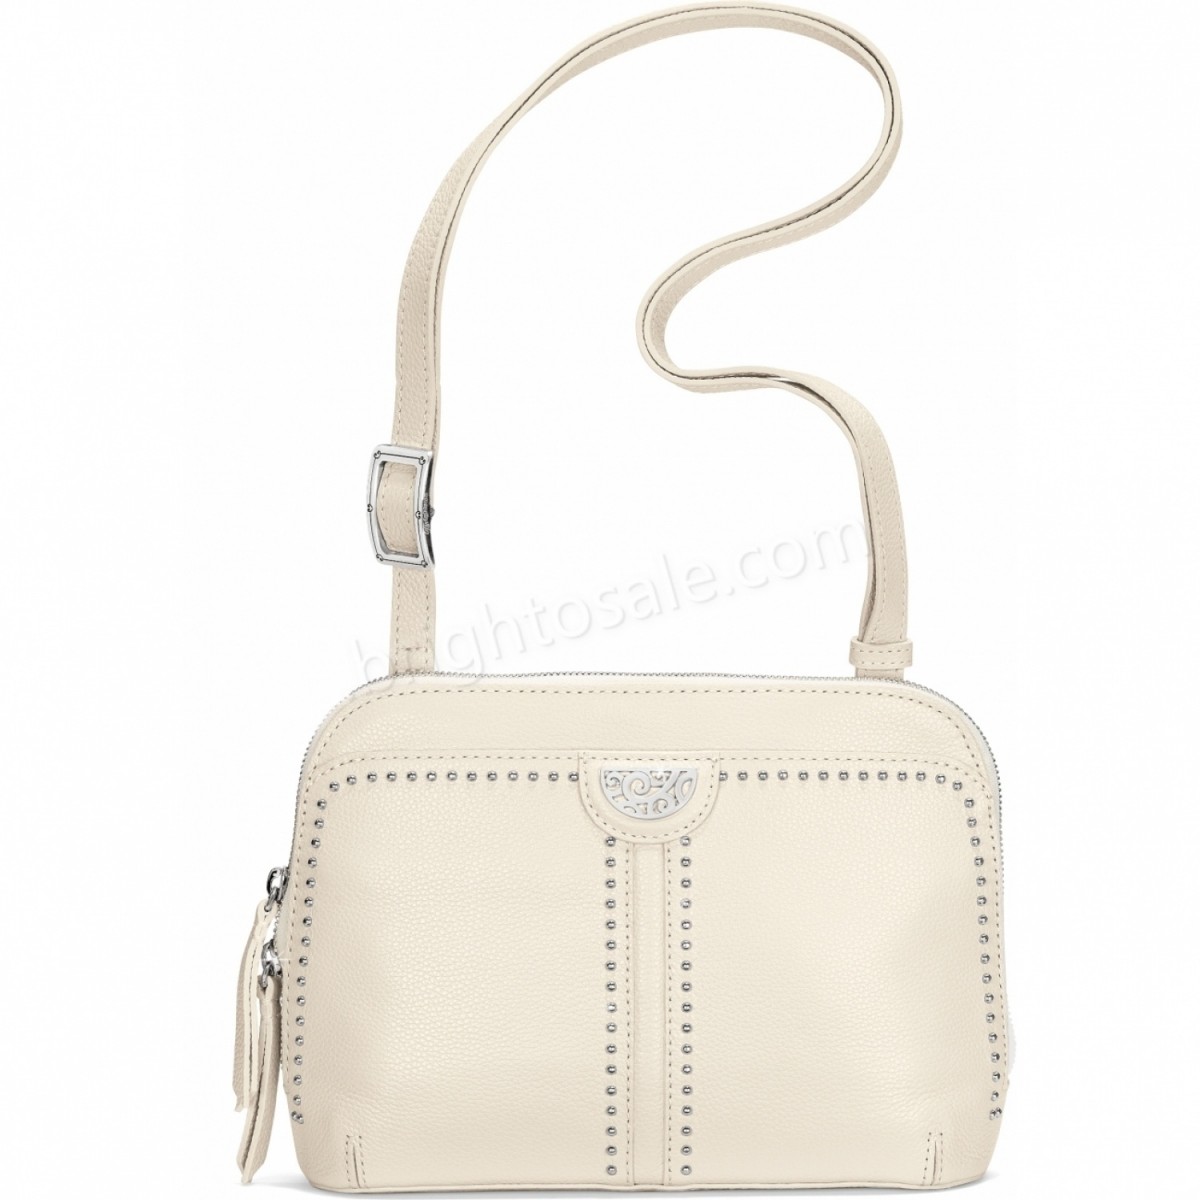 Brighton Collectibles & Online Discount Addy Convertible Cross Body - -7